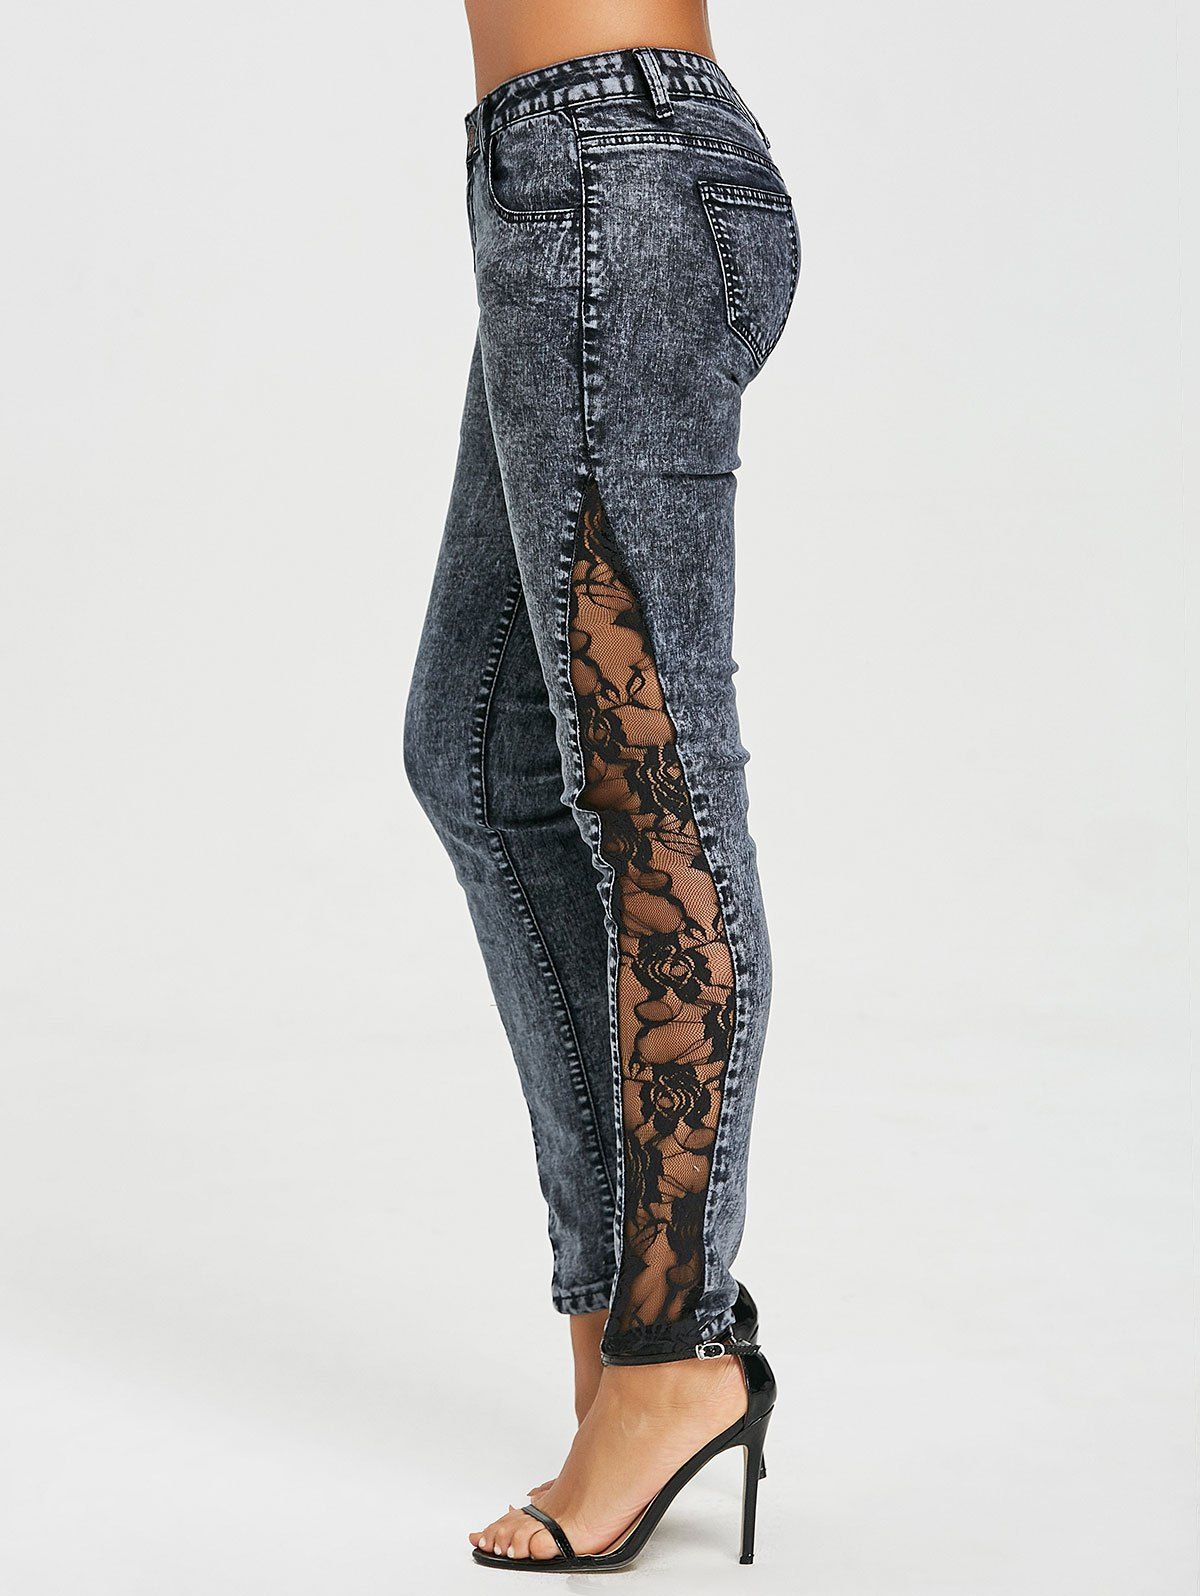 New See Through Lace Panel Jeans  